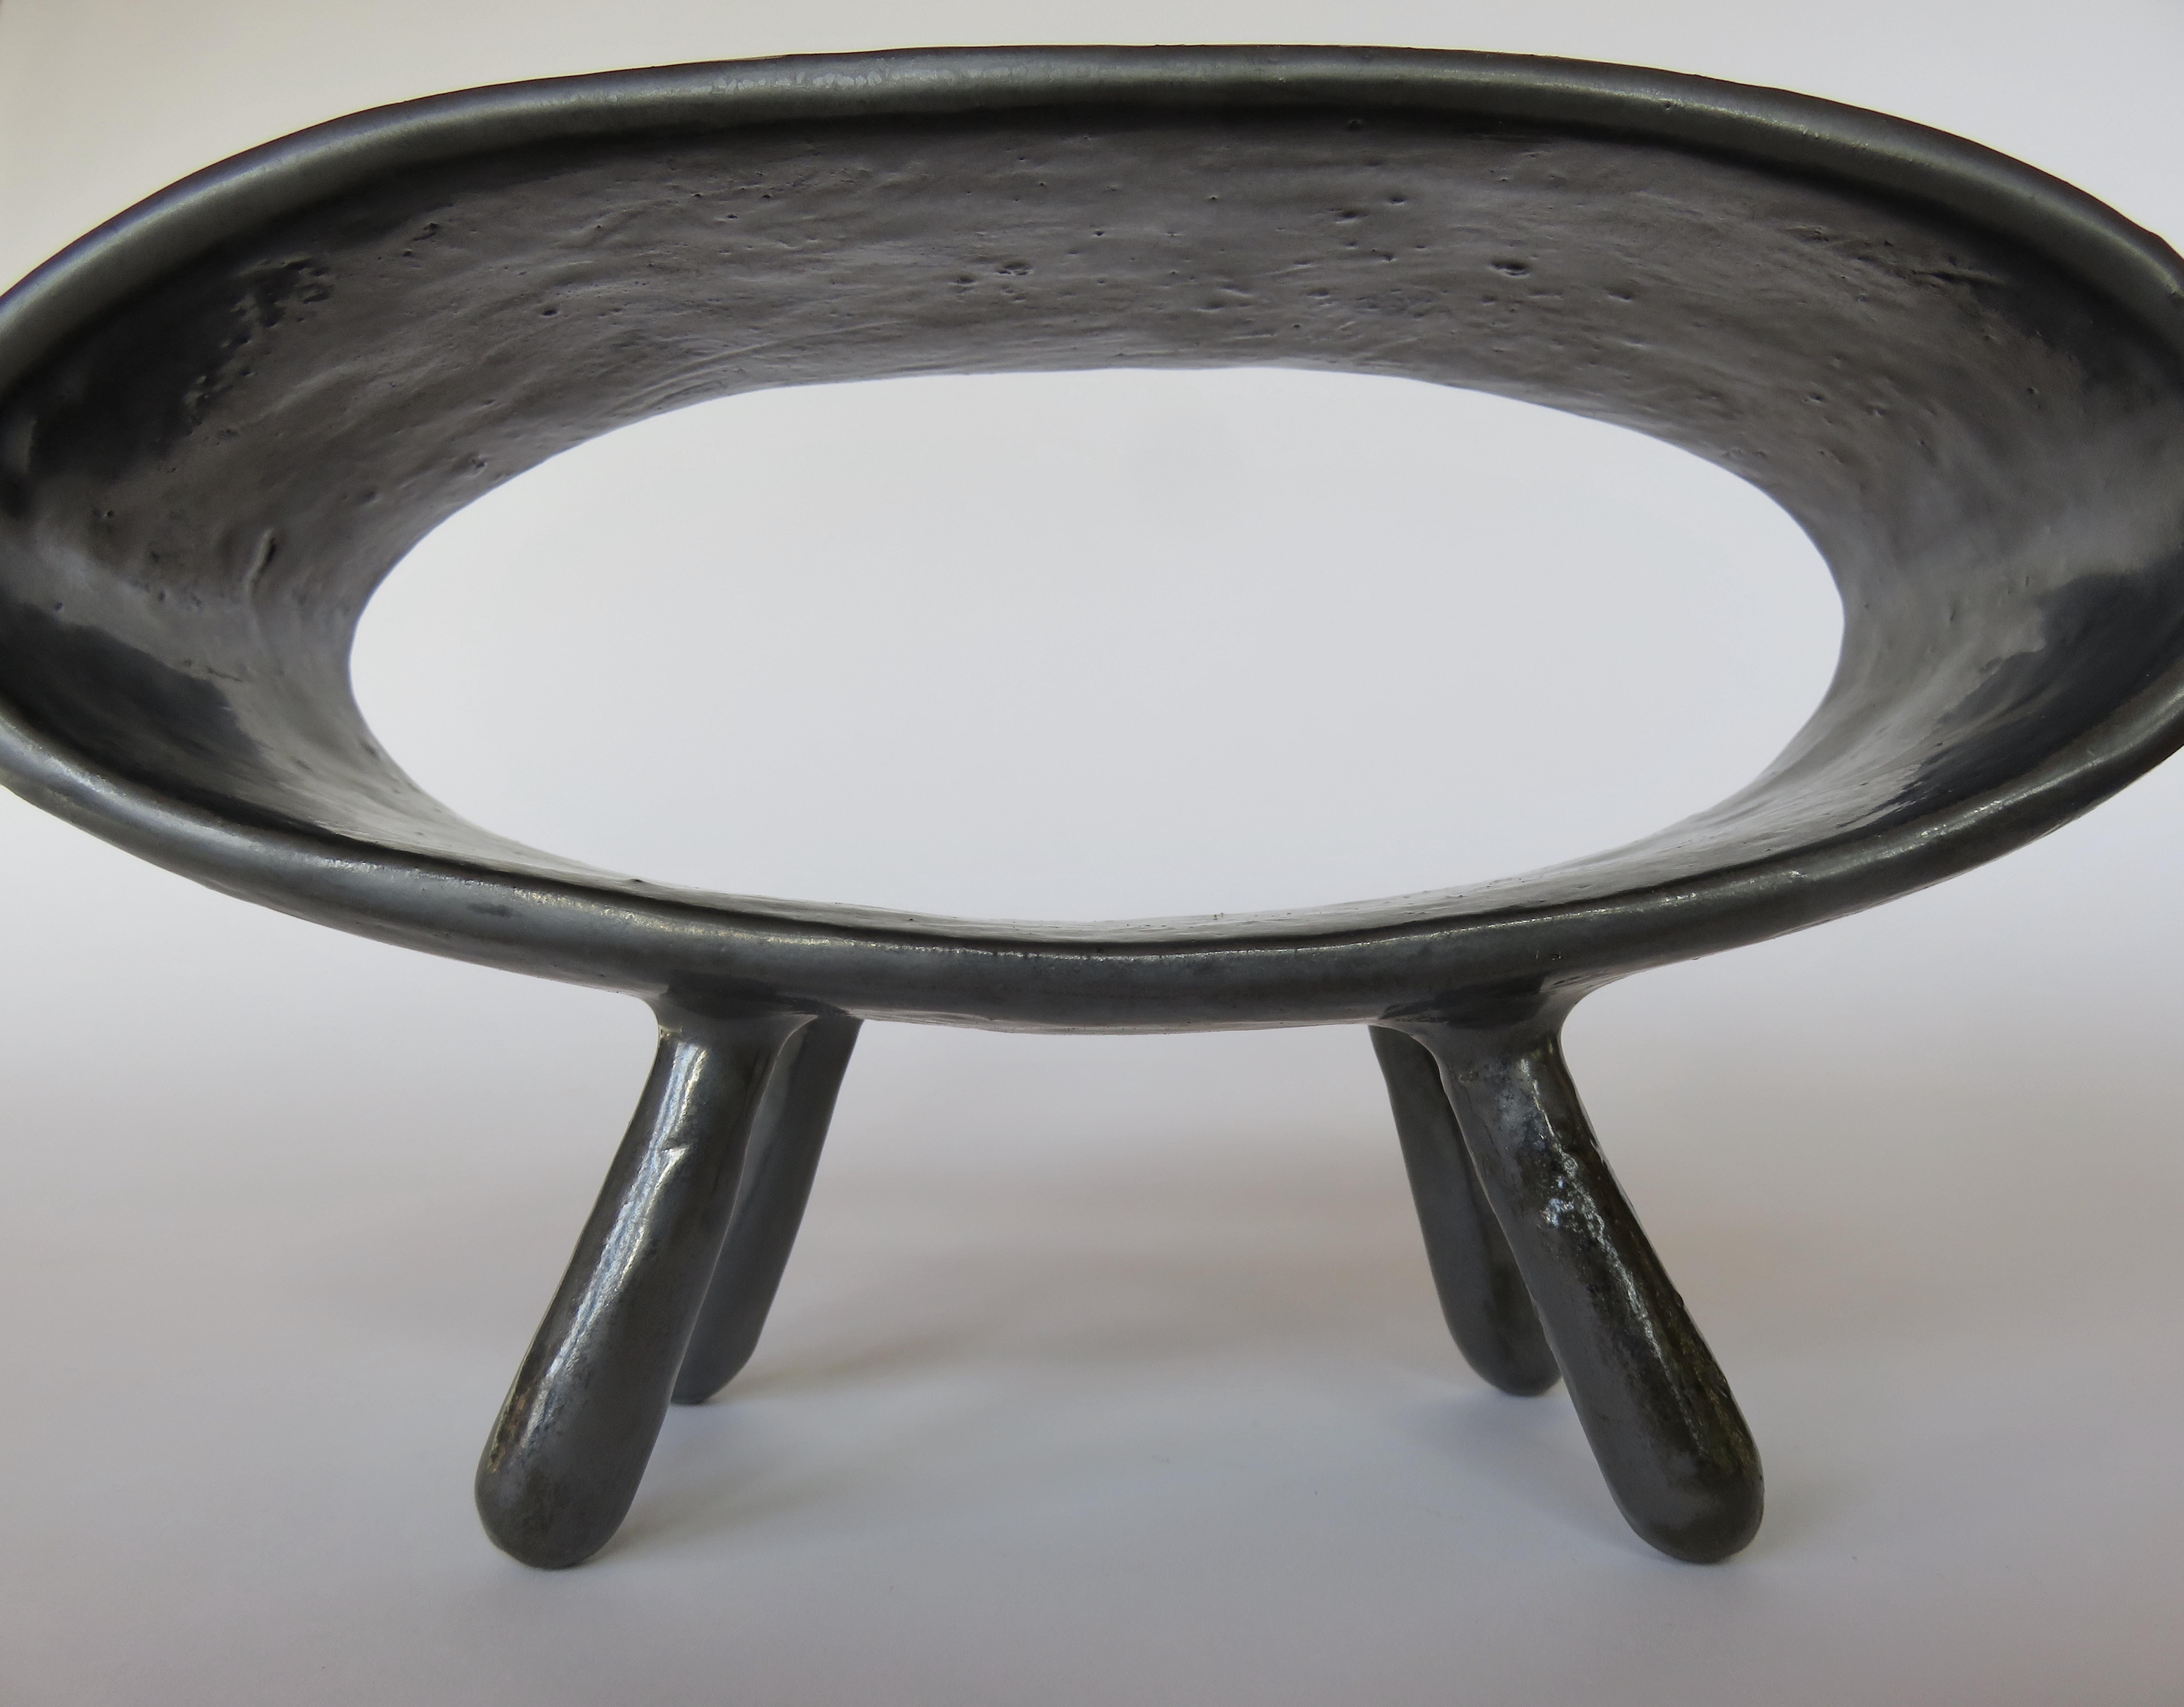 Metallic Black Ceramic Sculpture, Hollow Pointed Oval on 4 Legs, Hand Built 10